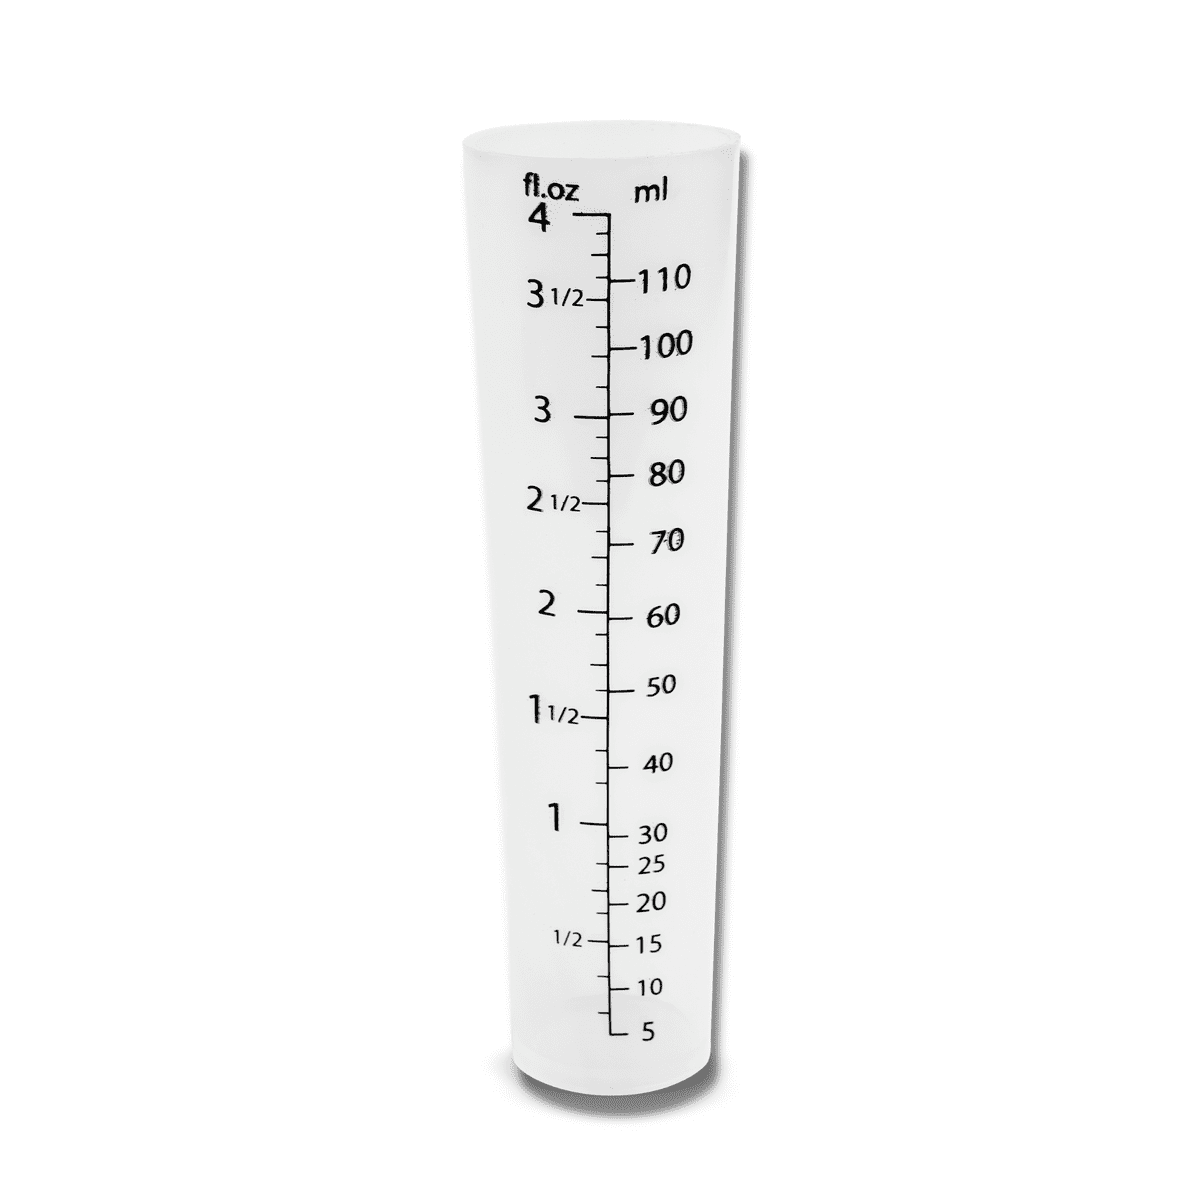 Measuring Cup Plastic Lawn Measuring Measuring Pitcher Lye Container 8oz Large Measuring Container Great Pool Measuring Cup For Chemicals Also Used For Motor Oil Measuring 